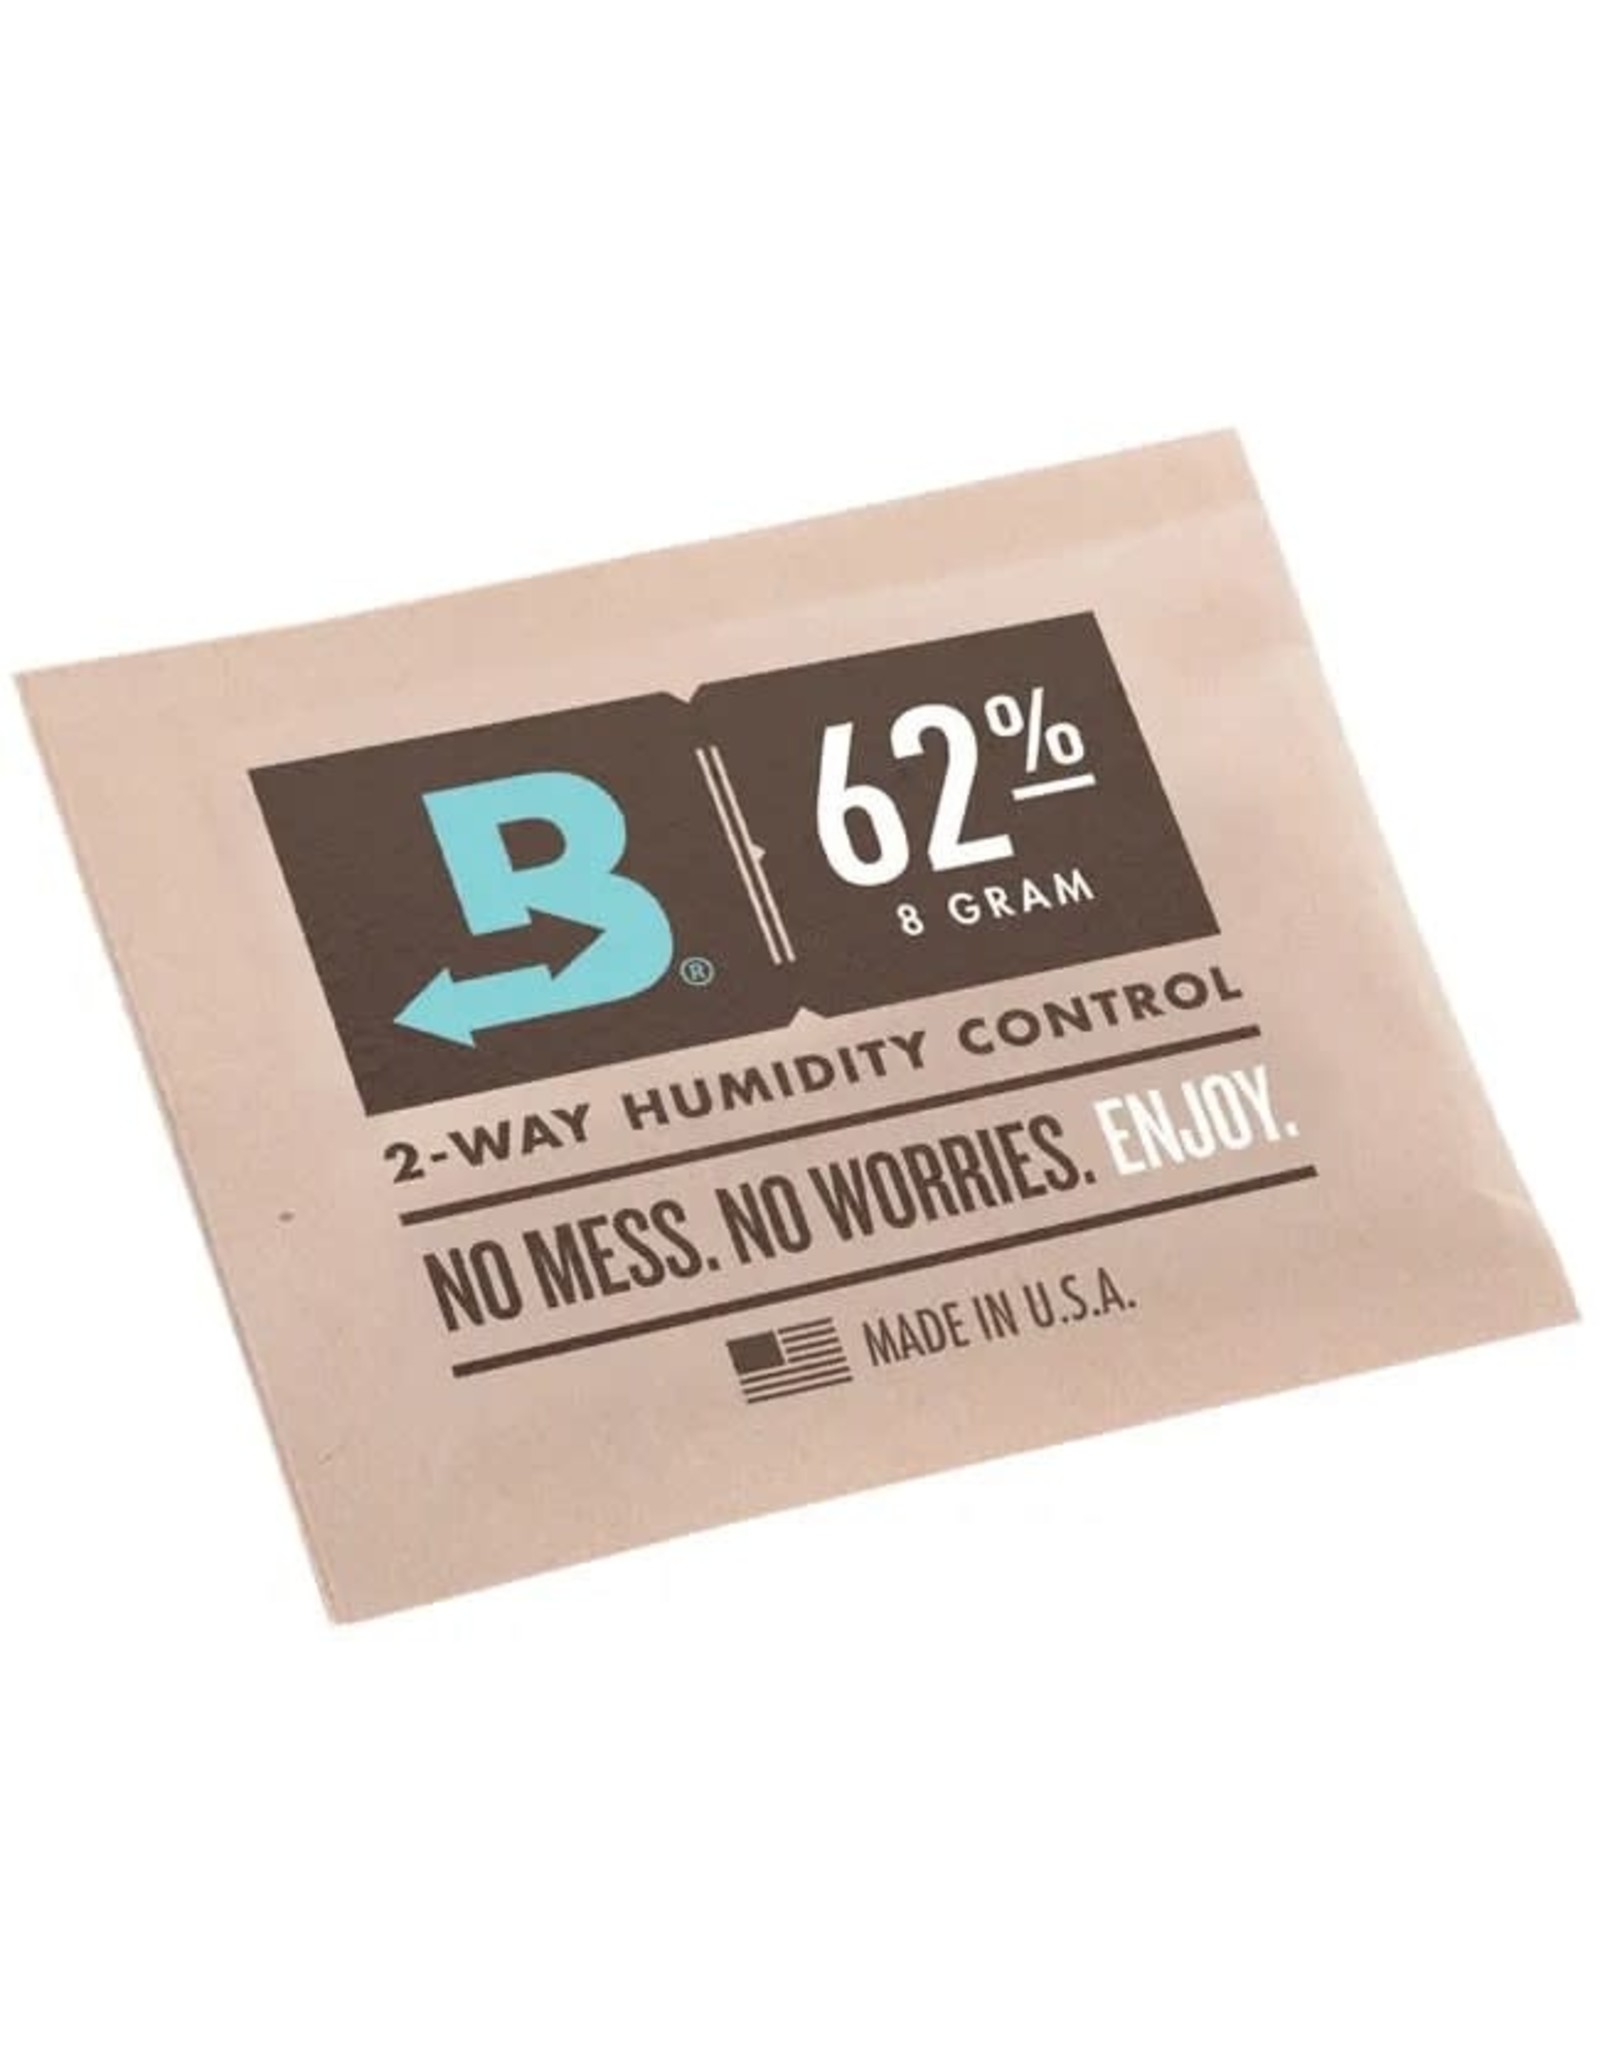 boveda Boveda Humidity Pouches 8g 62%